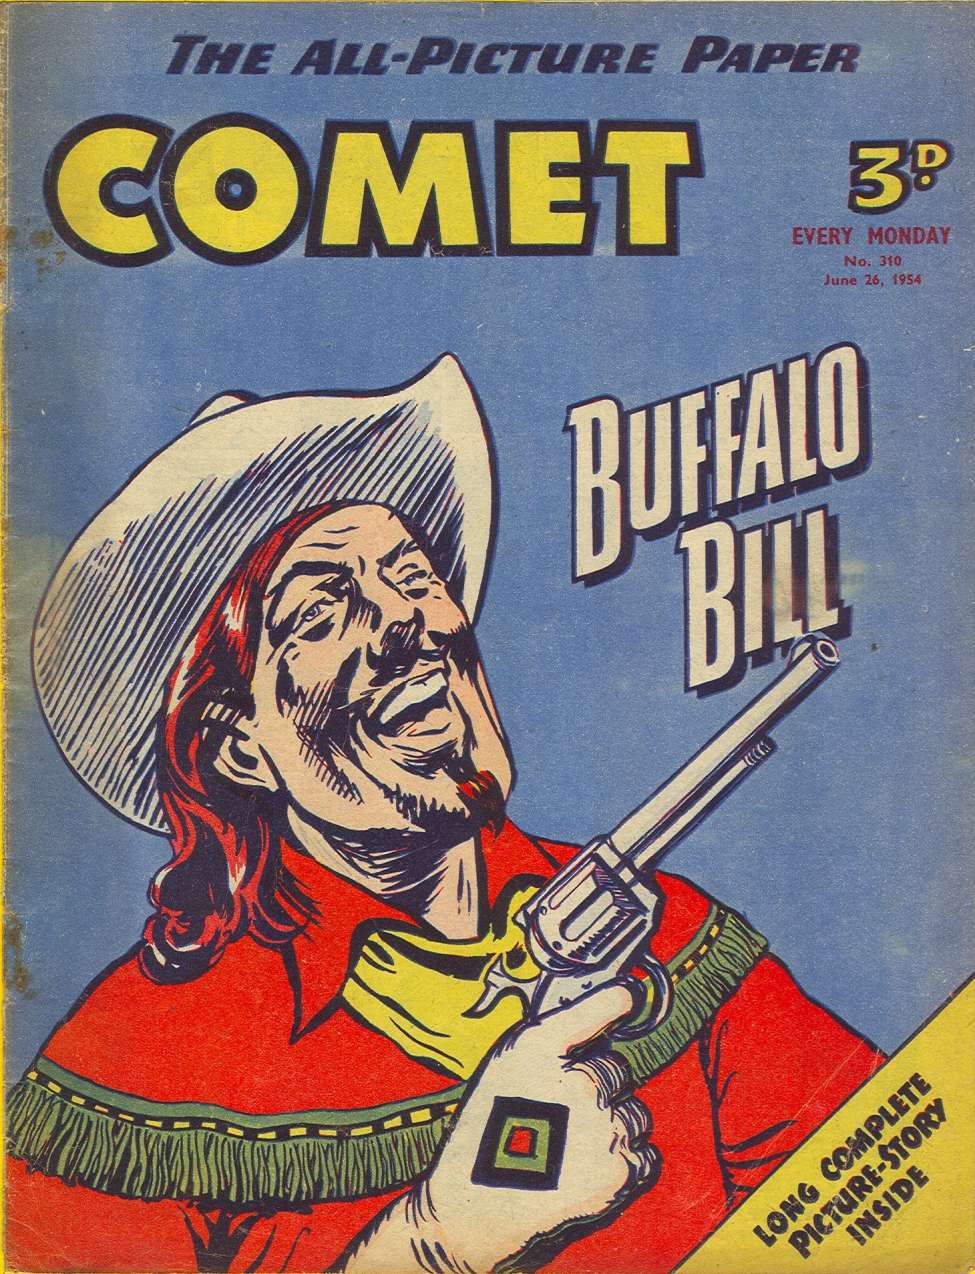 Book Cover For The Comet 310